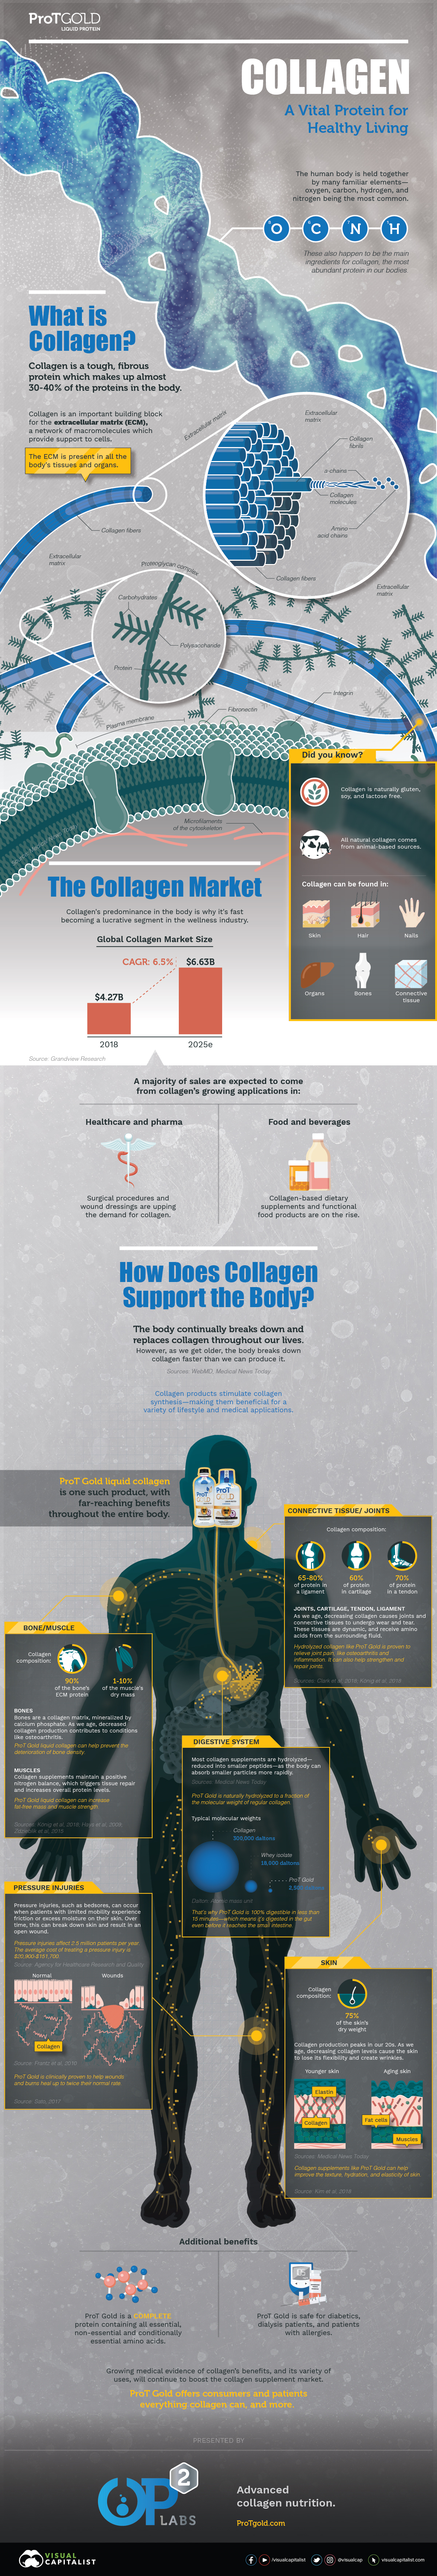 COLLAGEN - A Vital Protein for Healthy Living